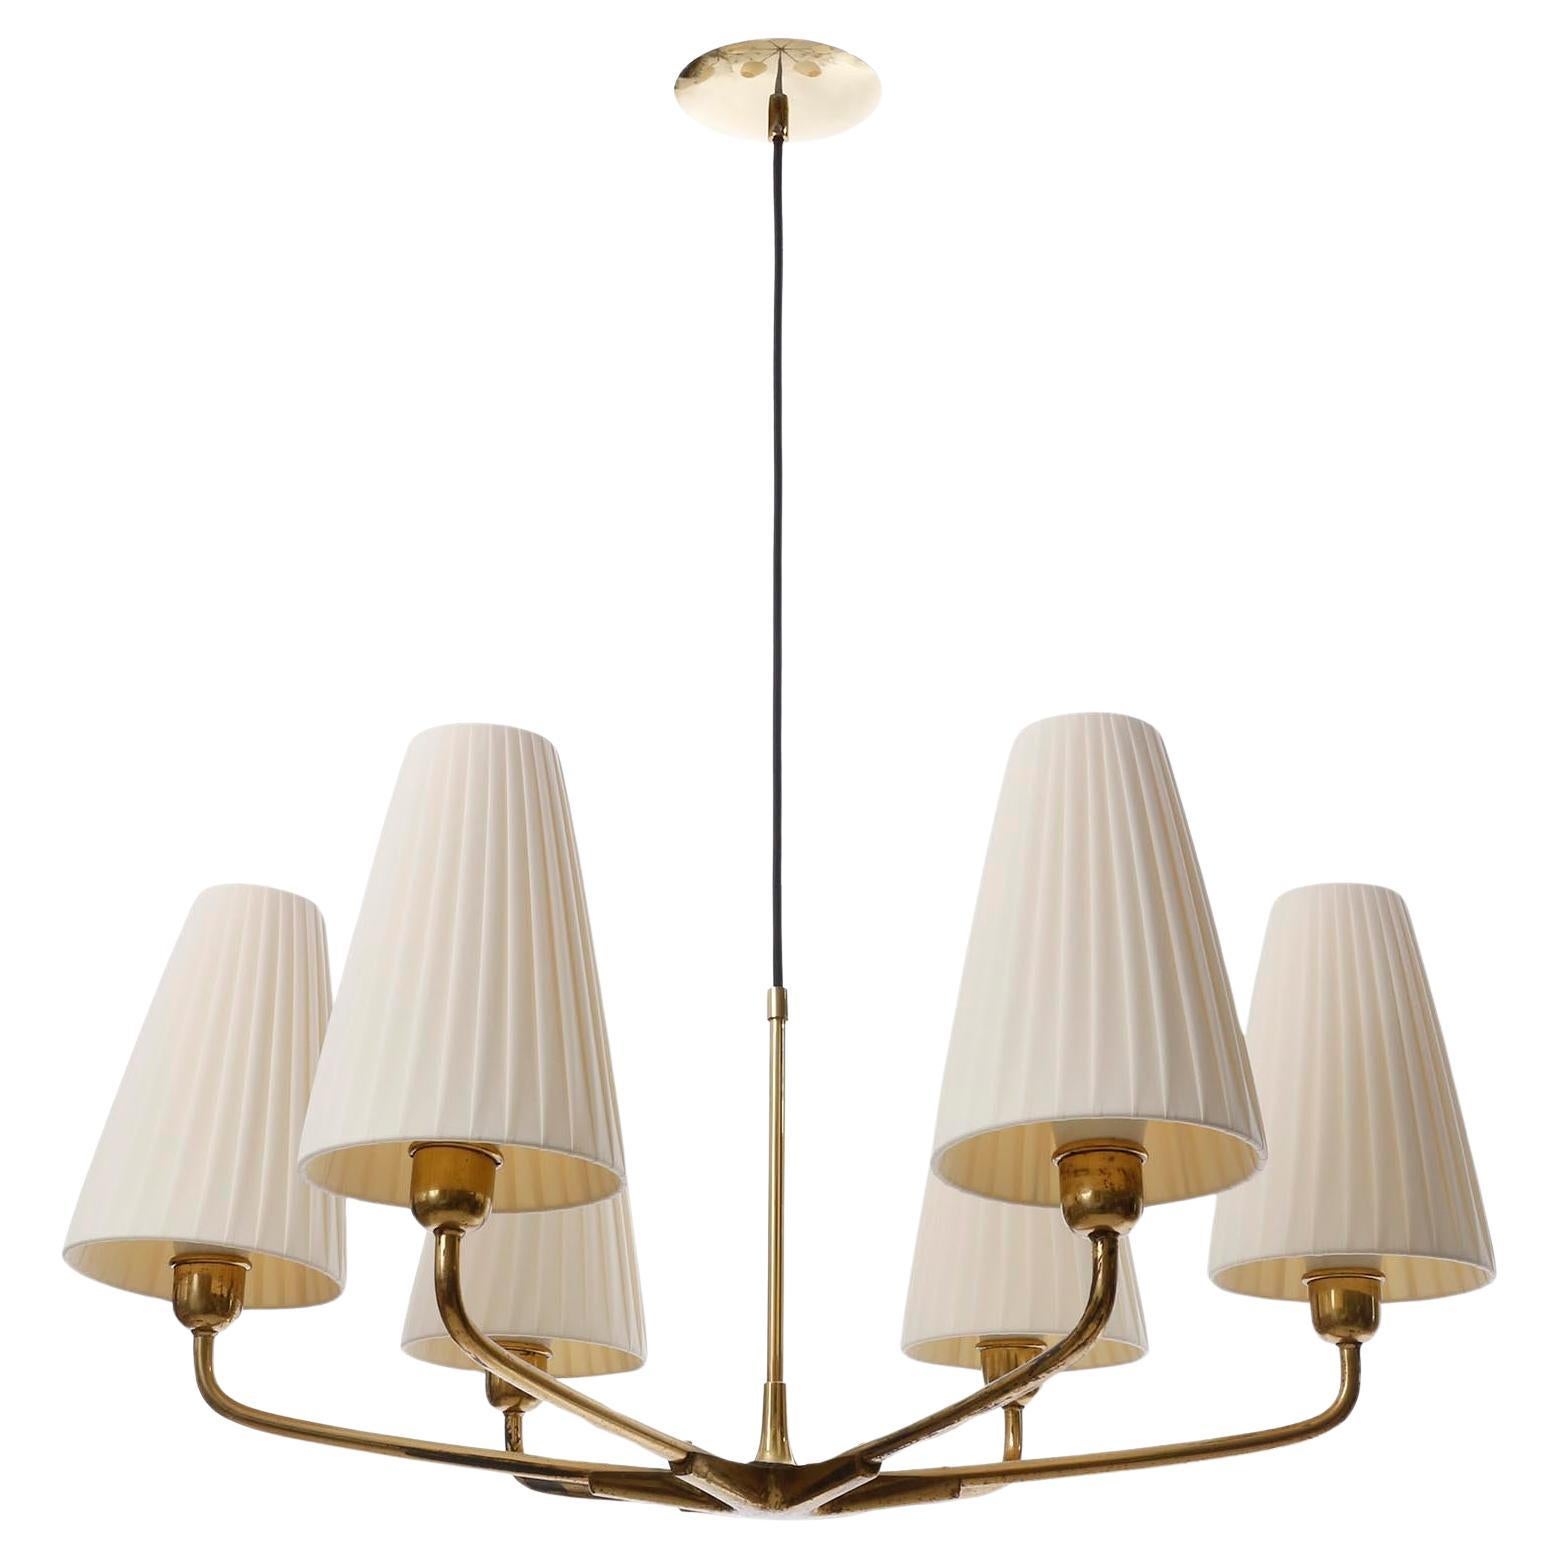 A fantastic pendant light manufactured in Austria in 1930s.
The fixture is made of brass with six curved arms with cream-colored pleated fabric shades.
The brass parts have patina, wear and a warm aged hue. They can be repolished for free of